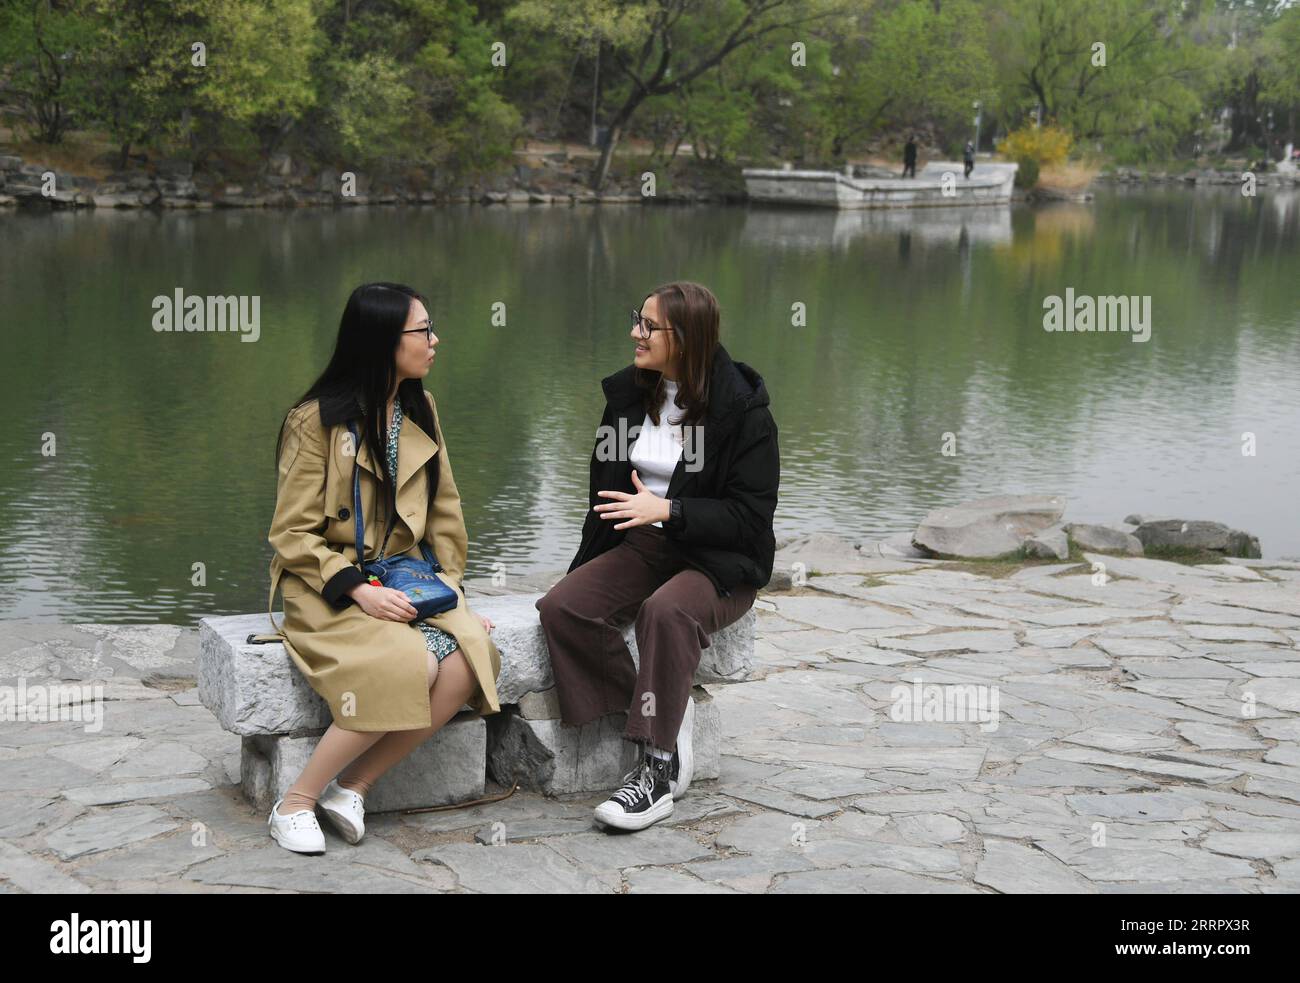 230415 -- BEIJING, April 15, 2023 -- Maria R chats with her language partner Yin Yue, a student majoring in Teaching Chinese as a Second Language, at Peking University in Beijing, capital of China, April 13, 2023. Maria Eduarda Variani, Rafaela Viana dos Santos, Manuela Boiteux Pestana, and Marco Andre Rocha Germano are Brazilian students studying in the Master of China Studies program at the Yenching Academy of Peking University in China. The four of them have been interested in Chinese culture since they were young. After arriving in Beijing, they have been impressed by the Chinese capital s Stock Photo